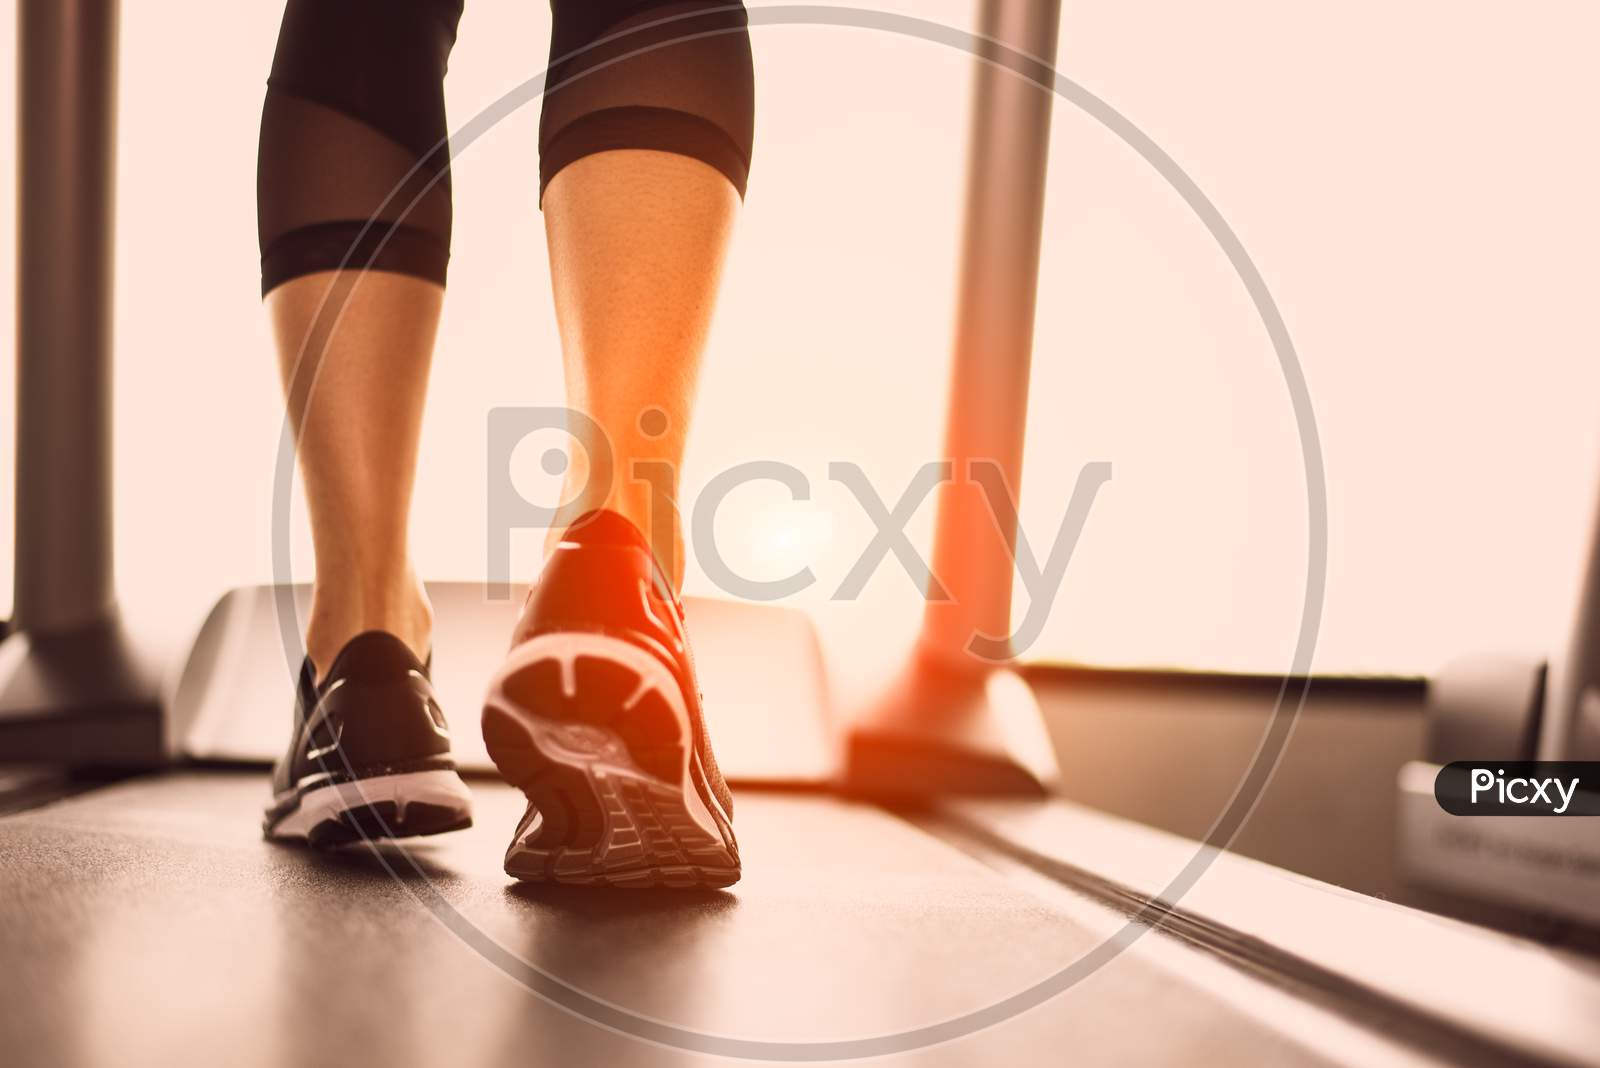 Close Up Of Woman Legs Jogging On Treadmill With Sportwear And Sneakers. Sport And Workout Concept. People And Leisure Concept. Healthcare And Lifestyles Theme. Back View Of Lower Body . Warm Tone